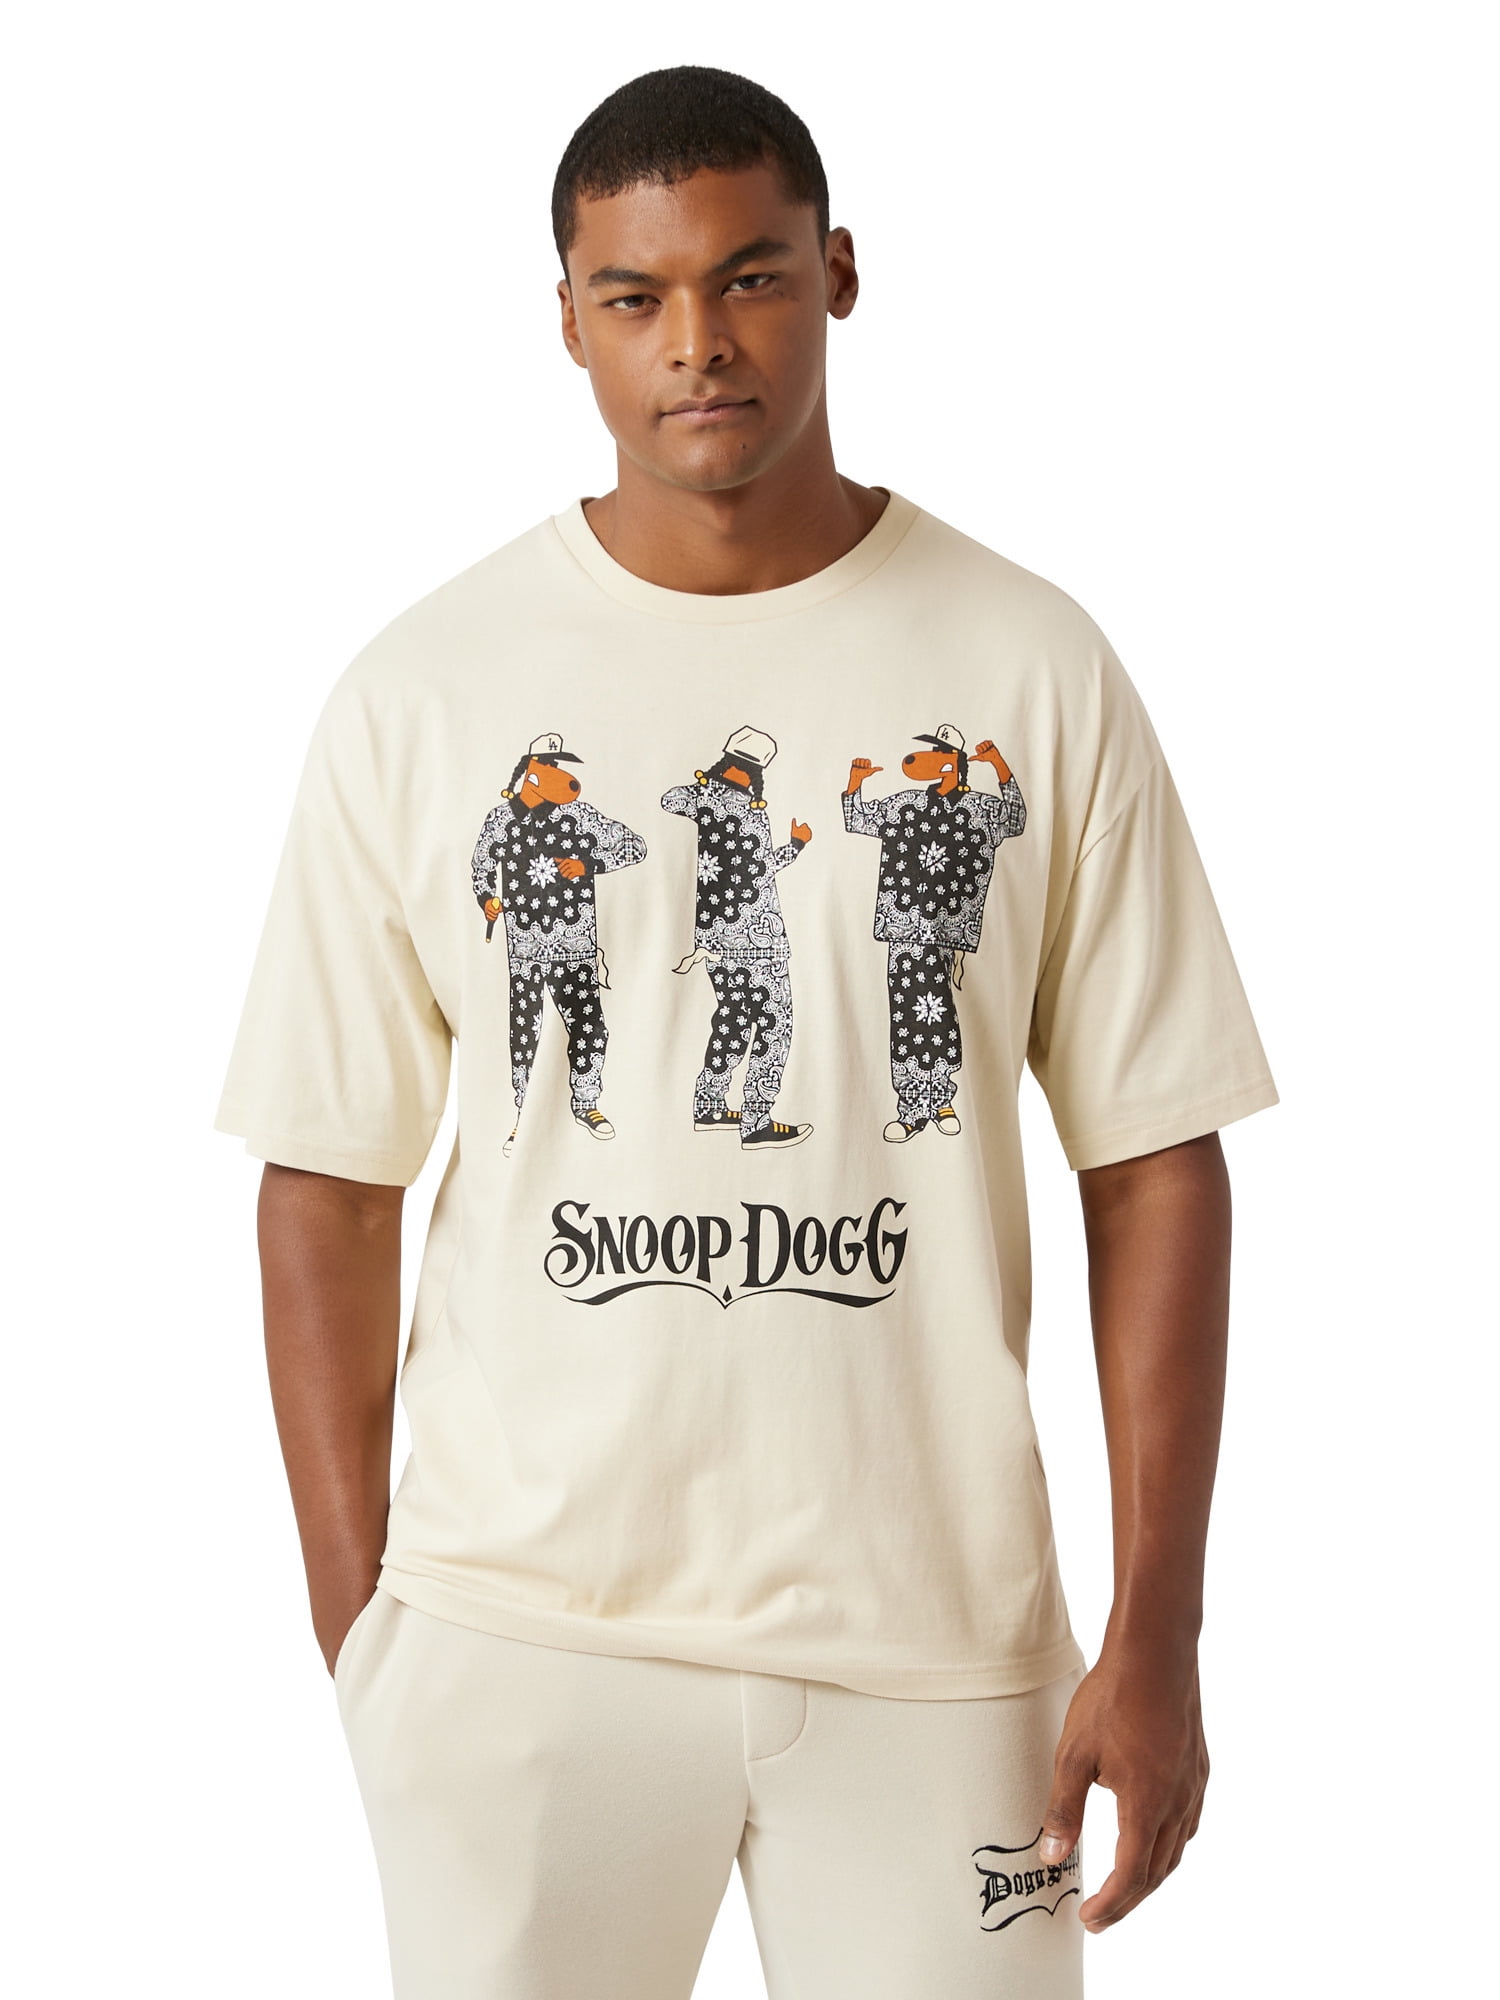 Dogg Supply by Snoop Dogg Men's & Big Men's Oversized Graphic T-Shirt,  Sizes XS-3XL